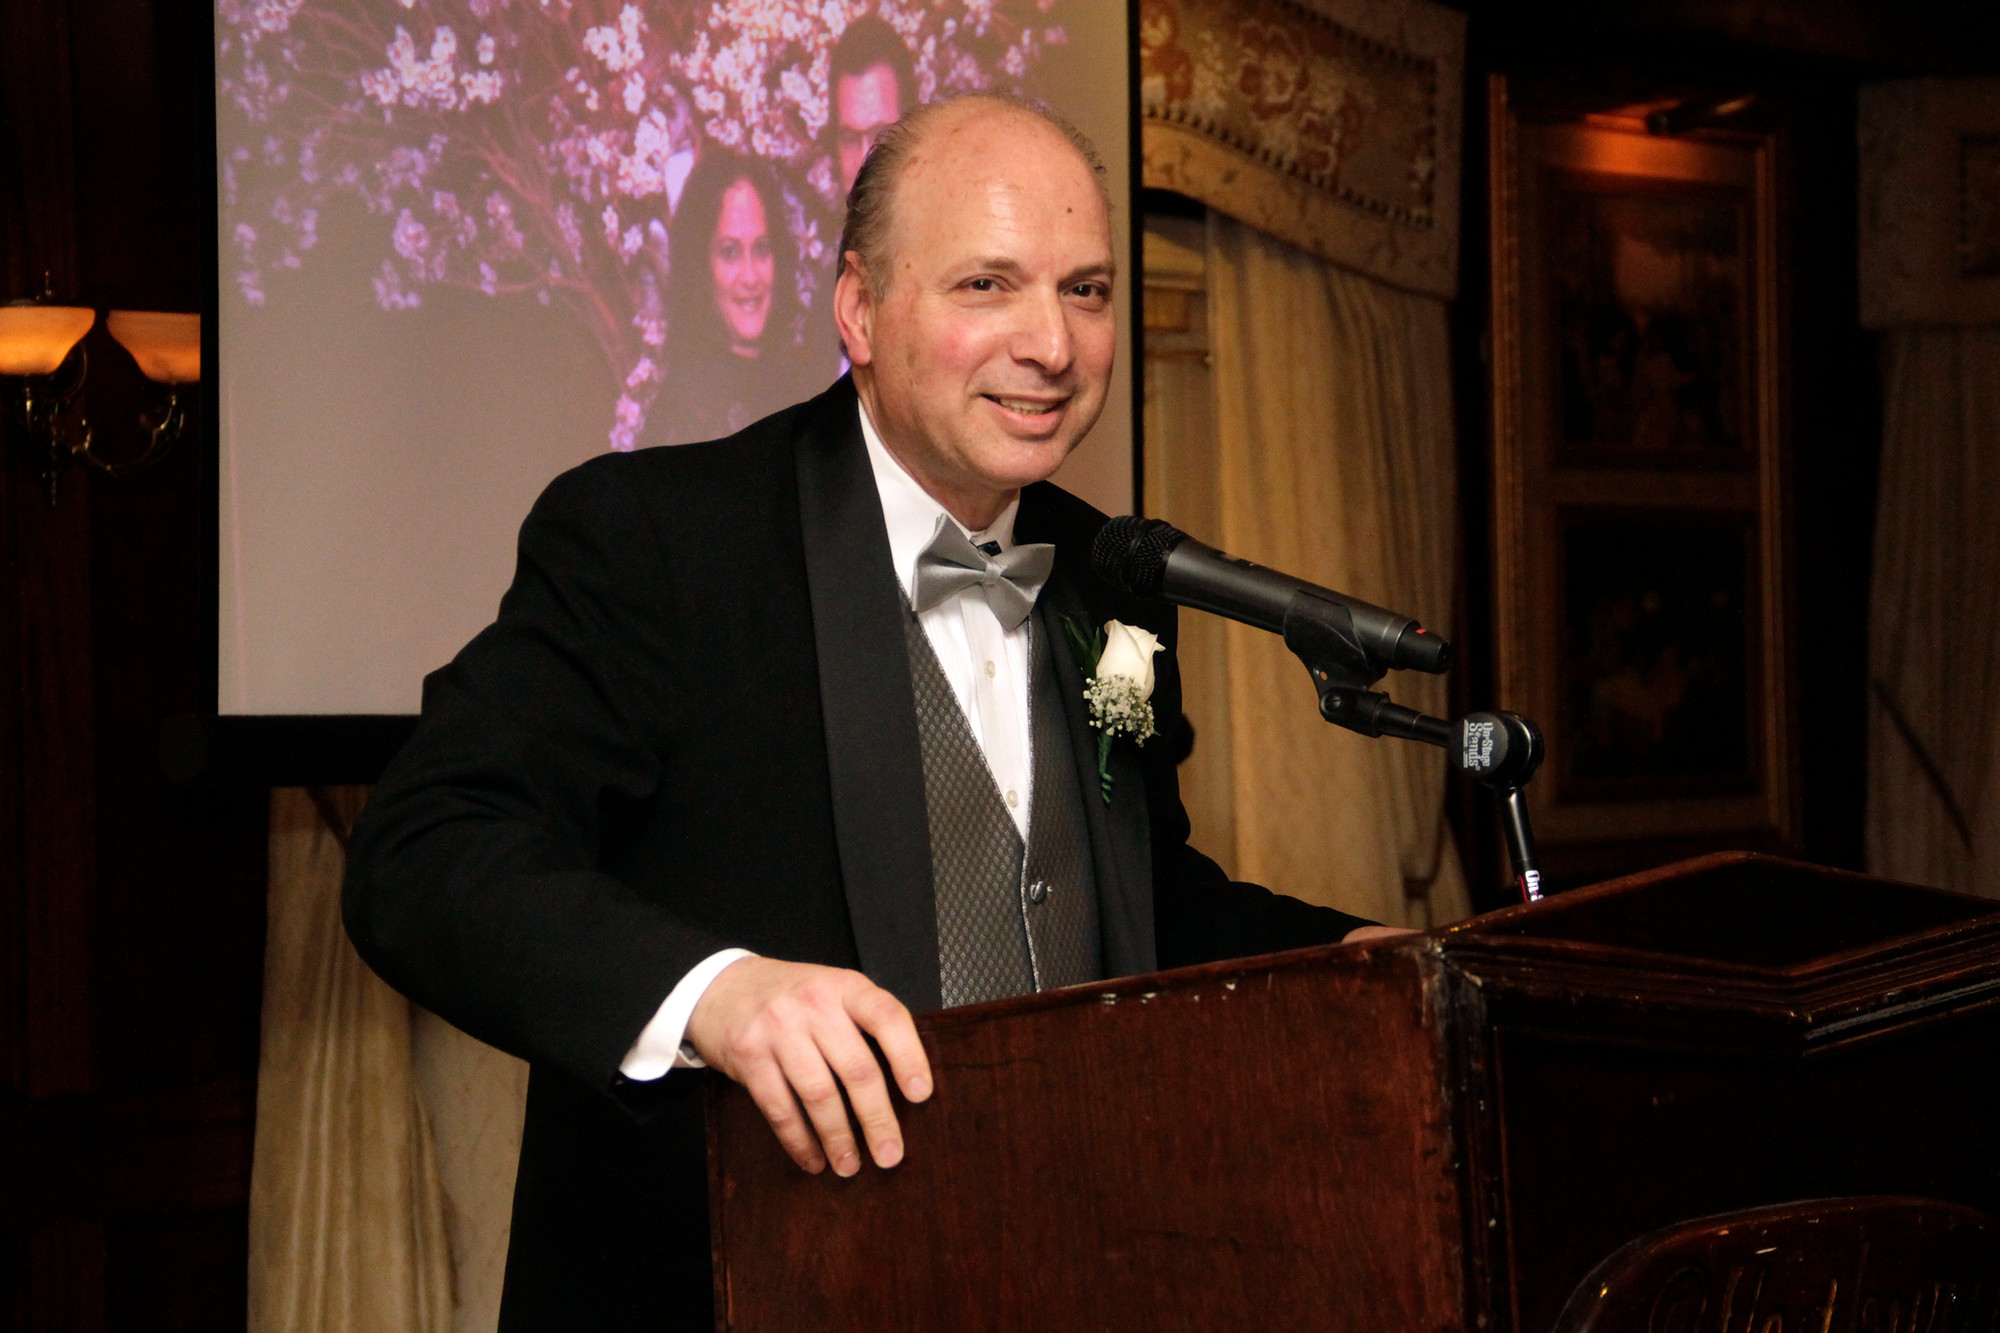 Mike Panagatos, of the Empress Diner, accepted the Man of the Year Award.